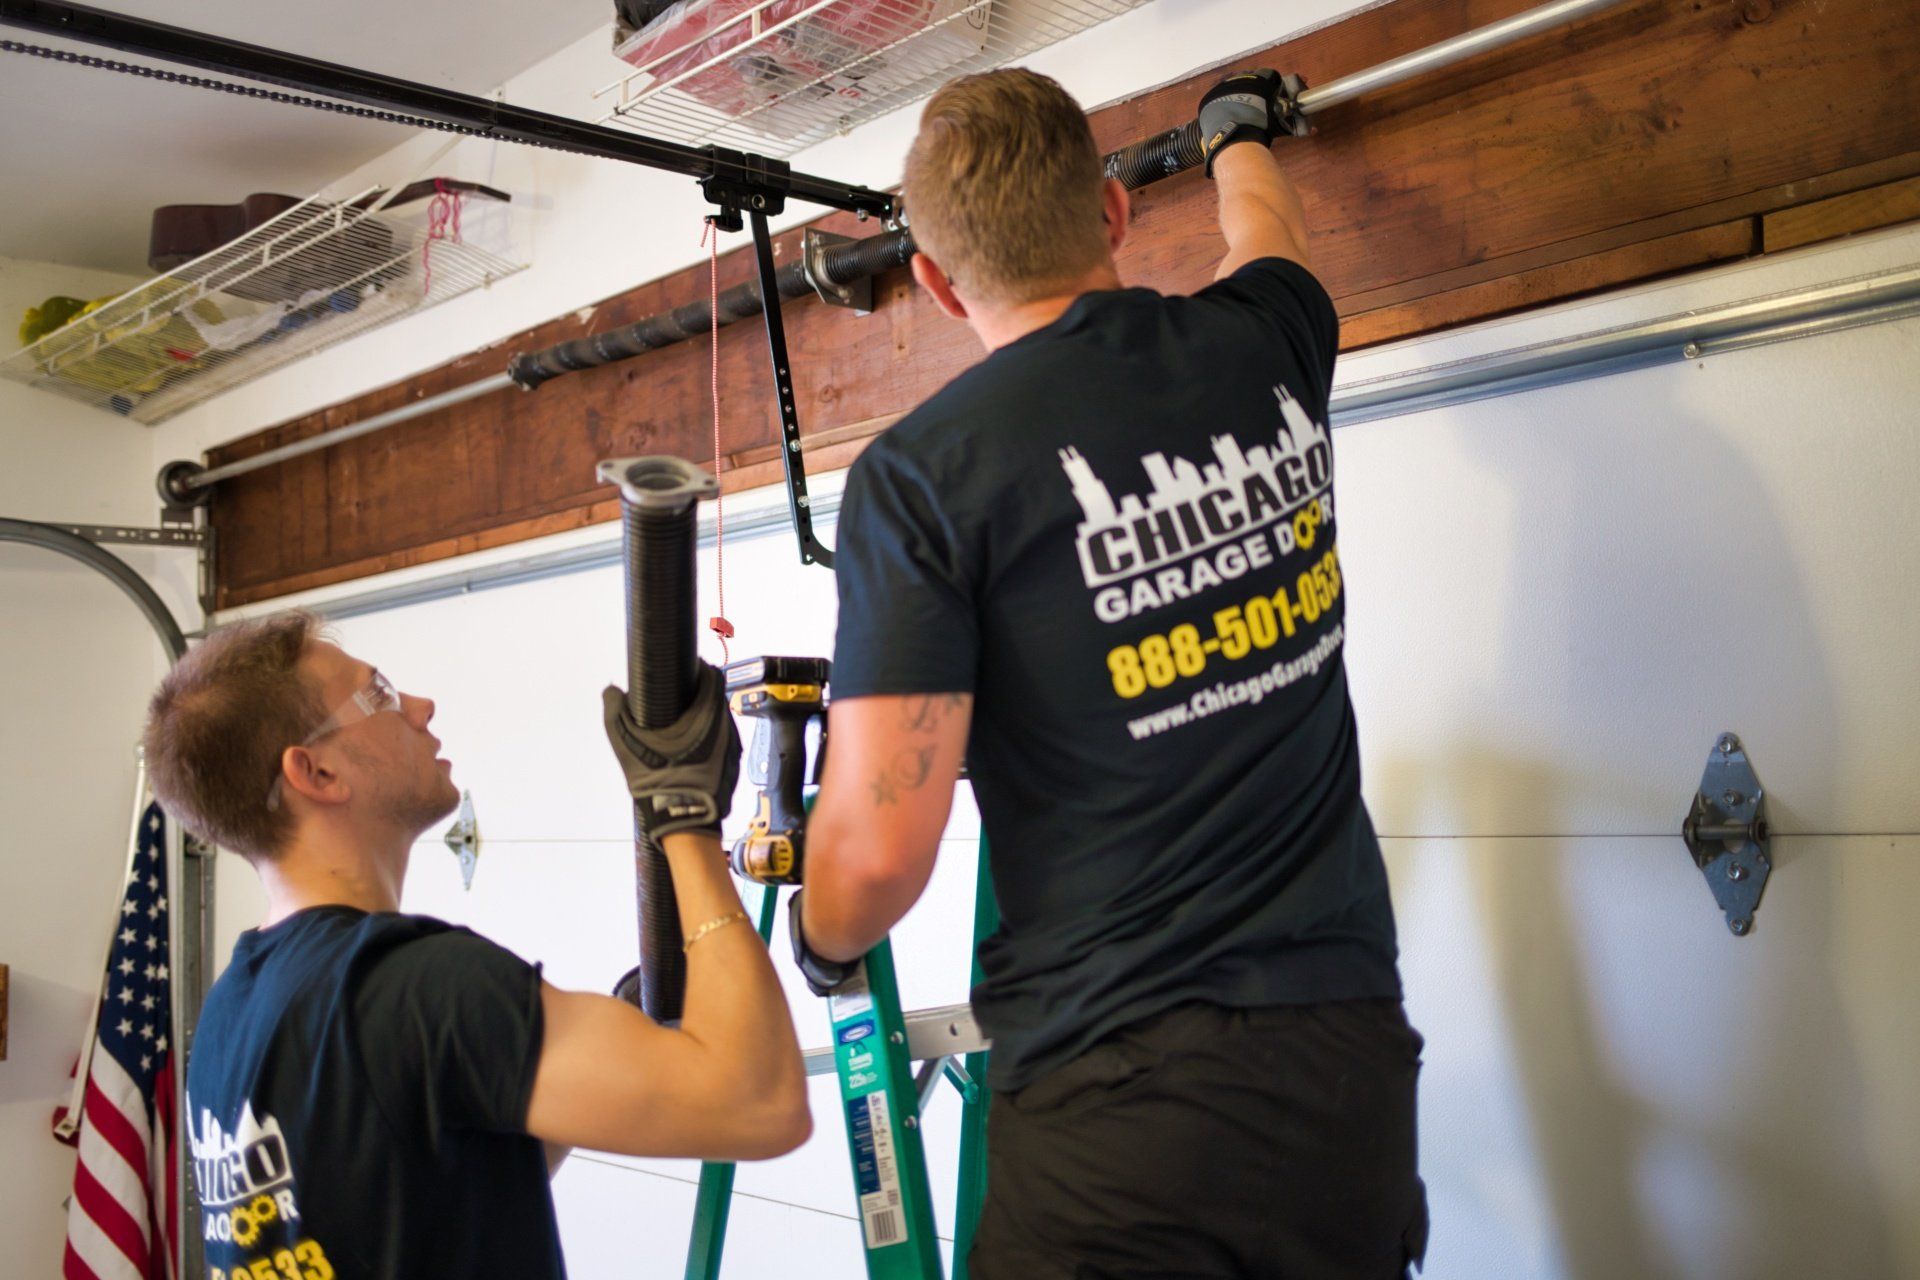 Excellent garage door repair service in Lake Villa, IL and all the surrounding areas